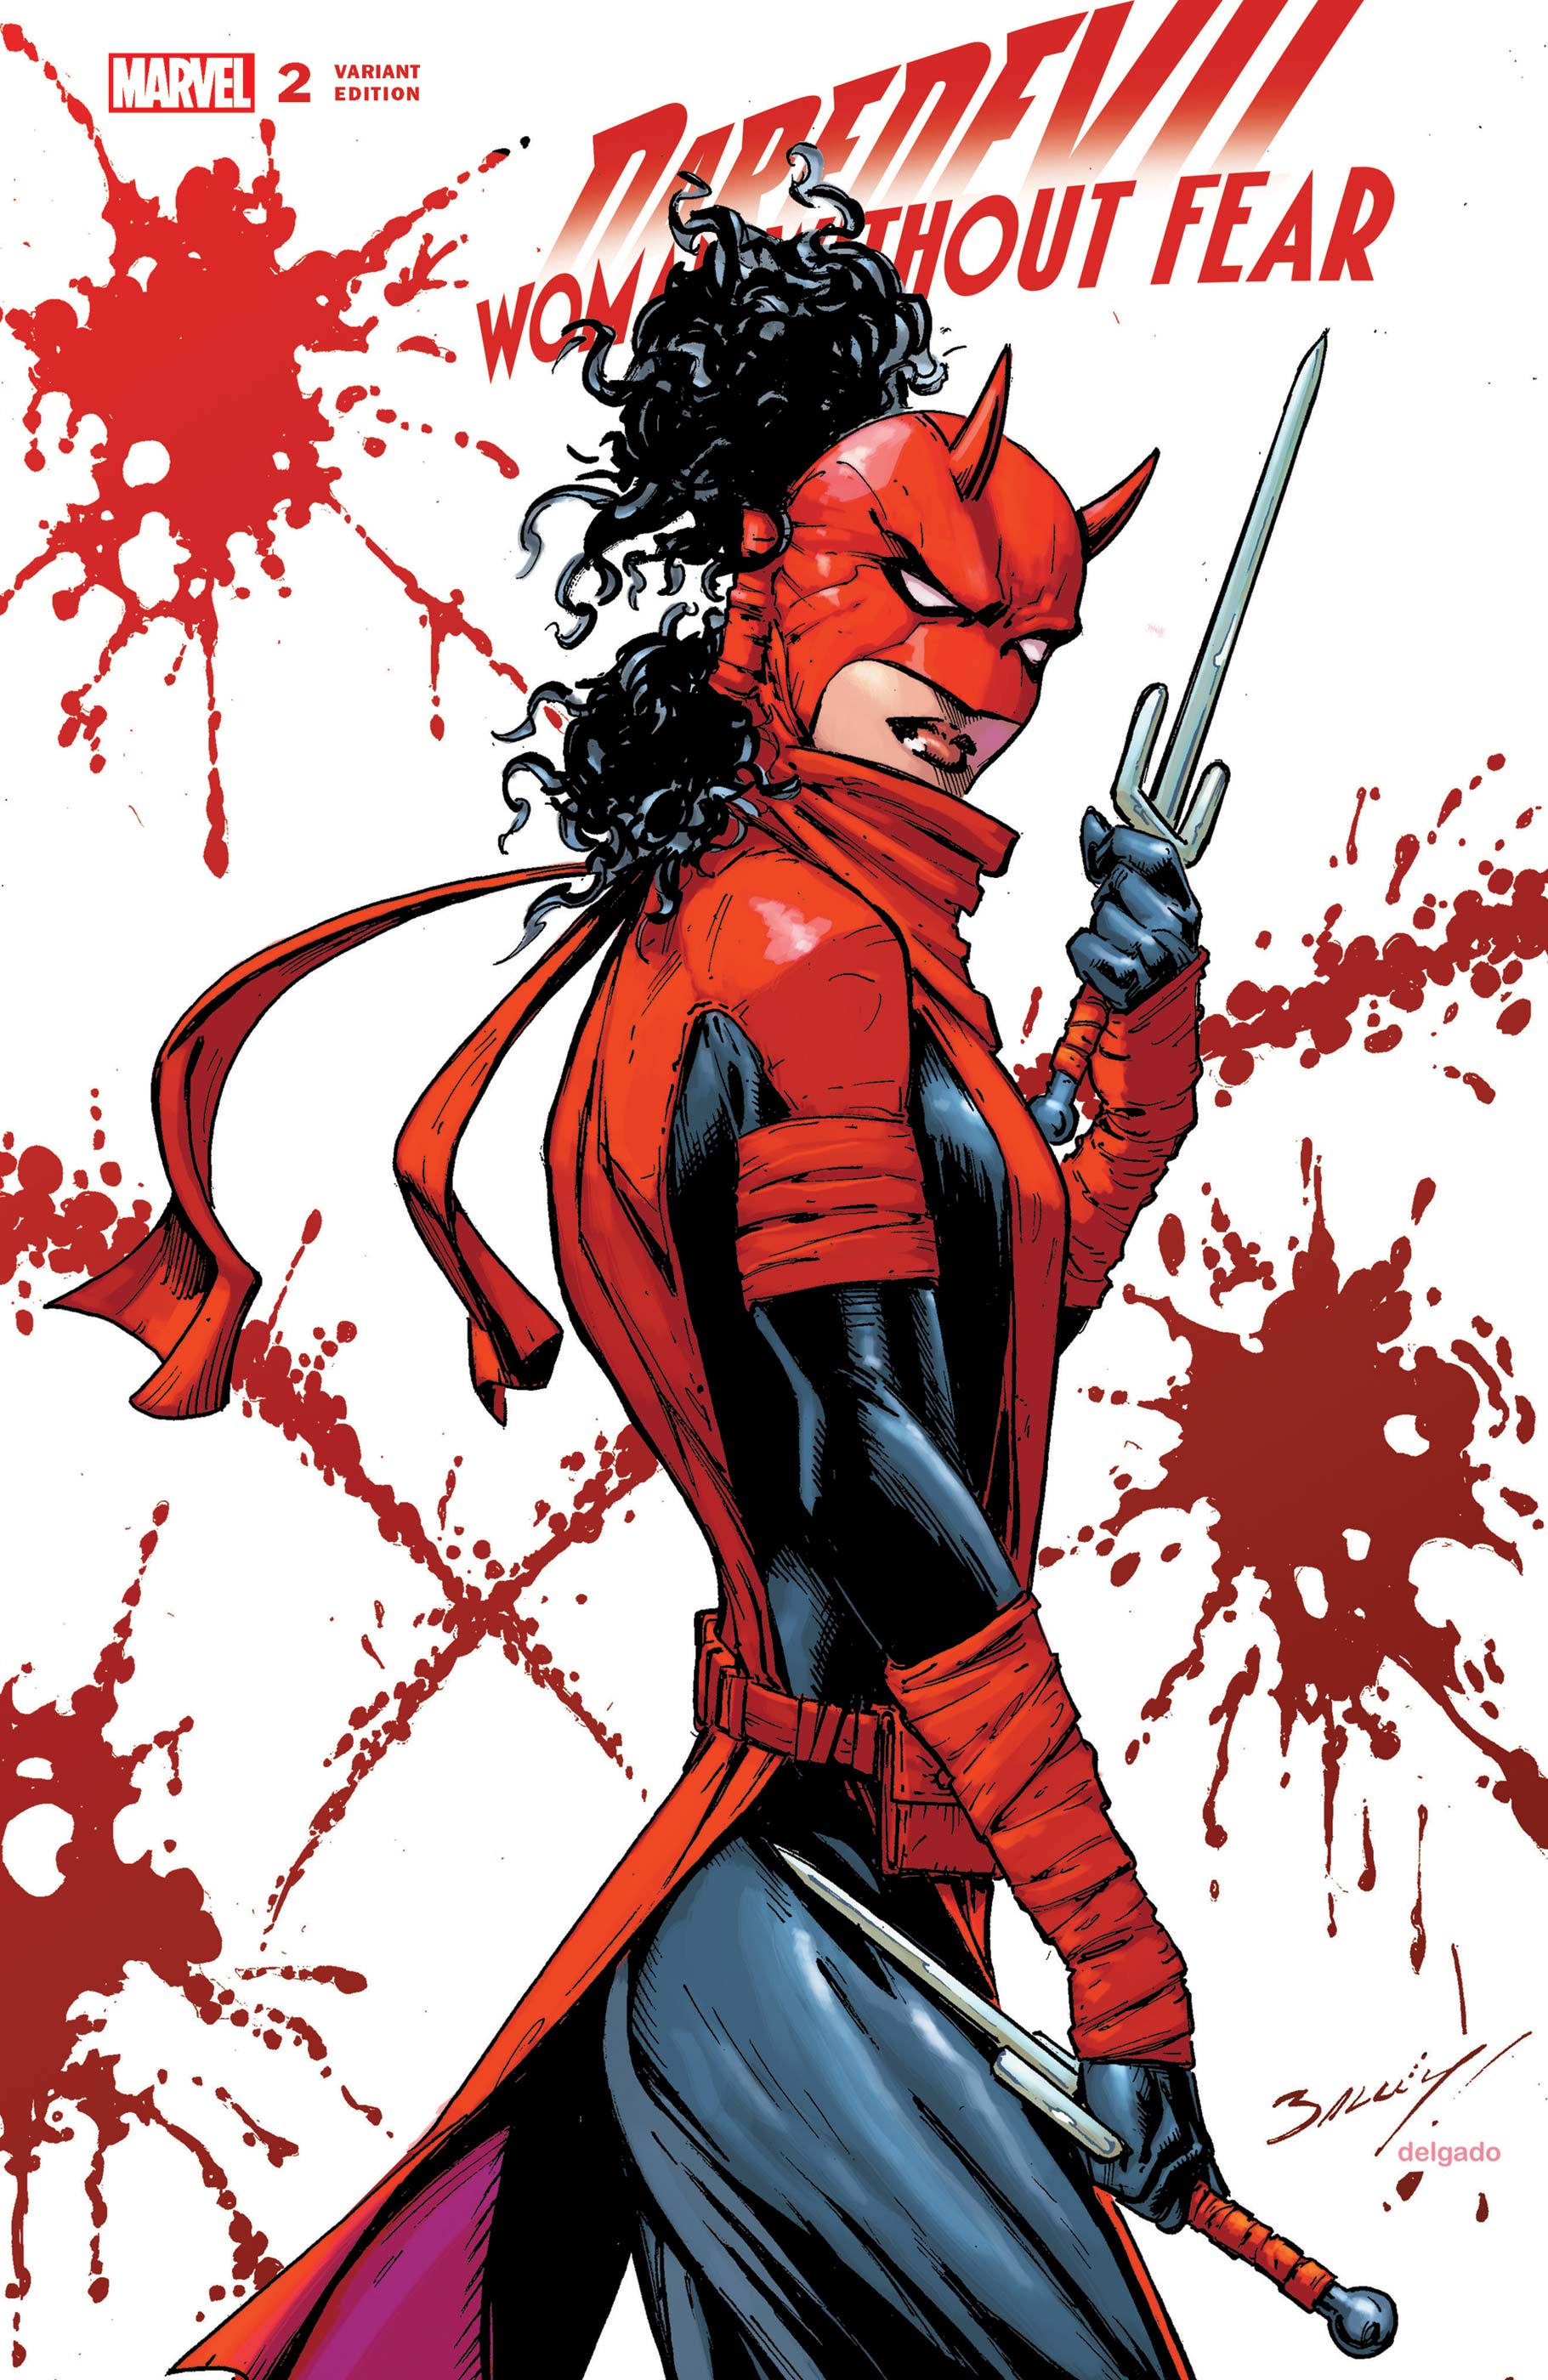 Daredevil: Woman Without Fear (2022) #2 (Variant)